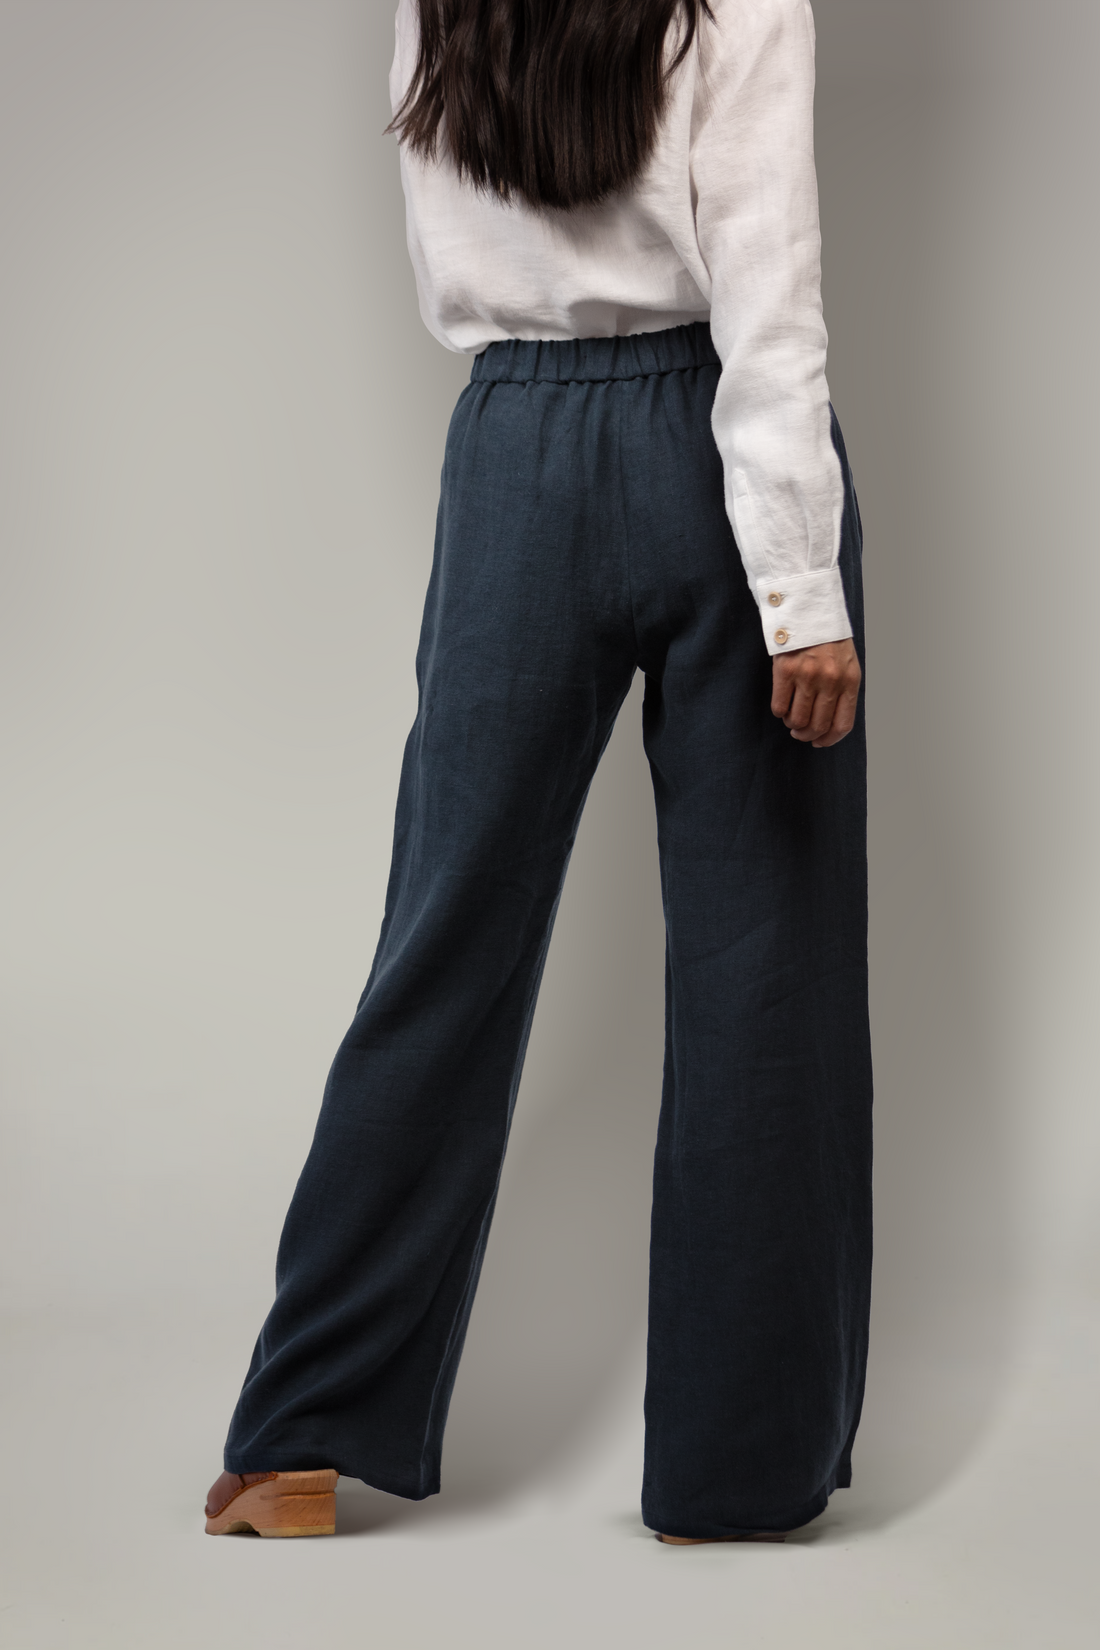 The River Keeper Linen Pant